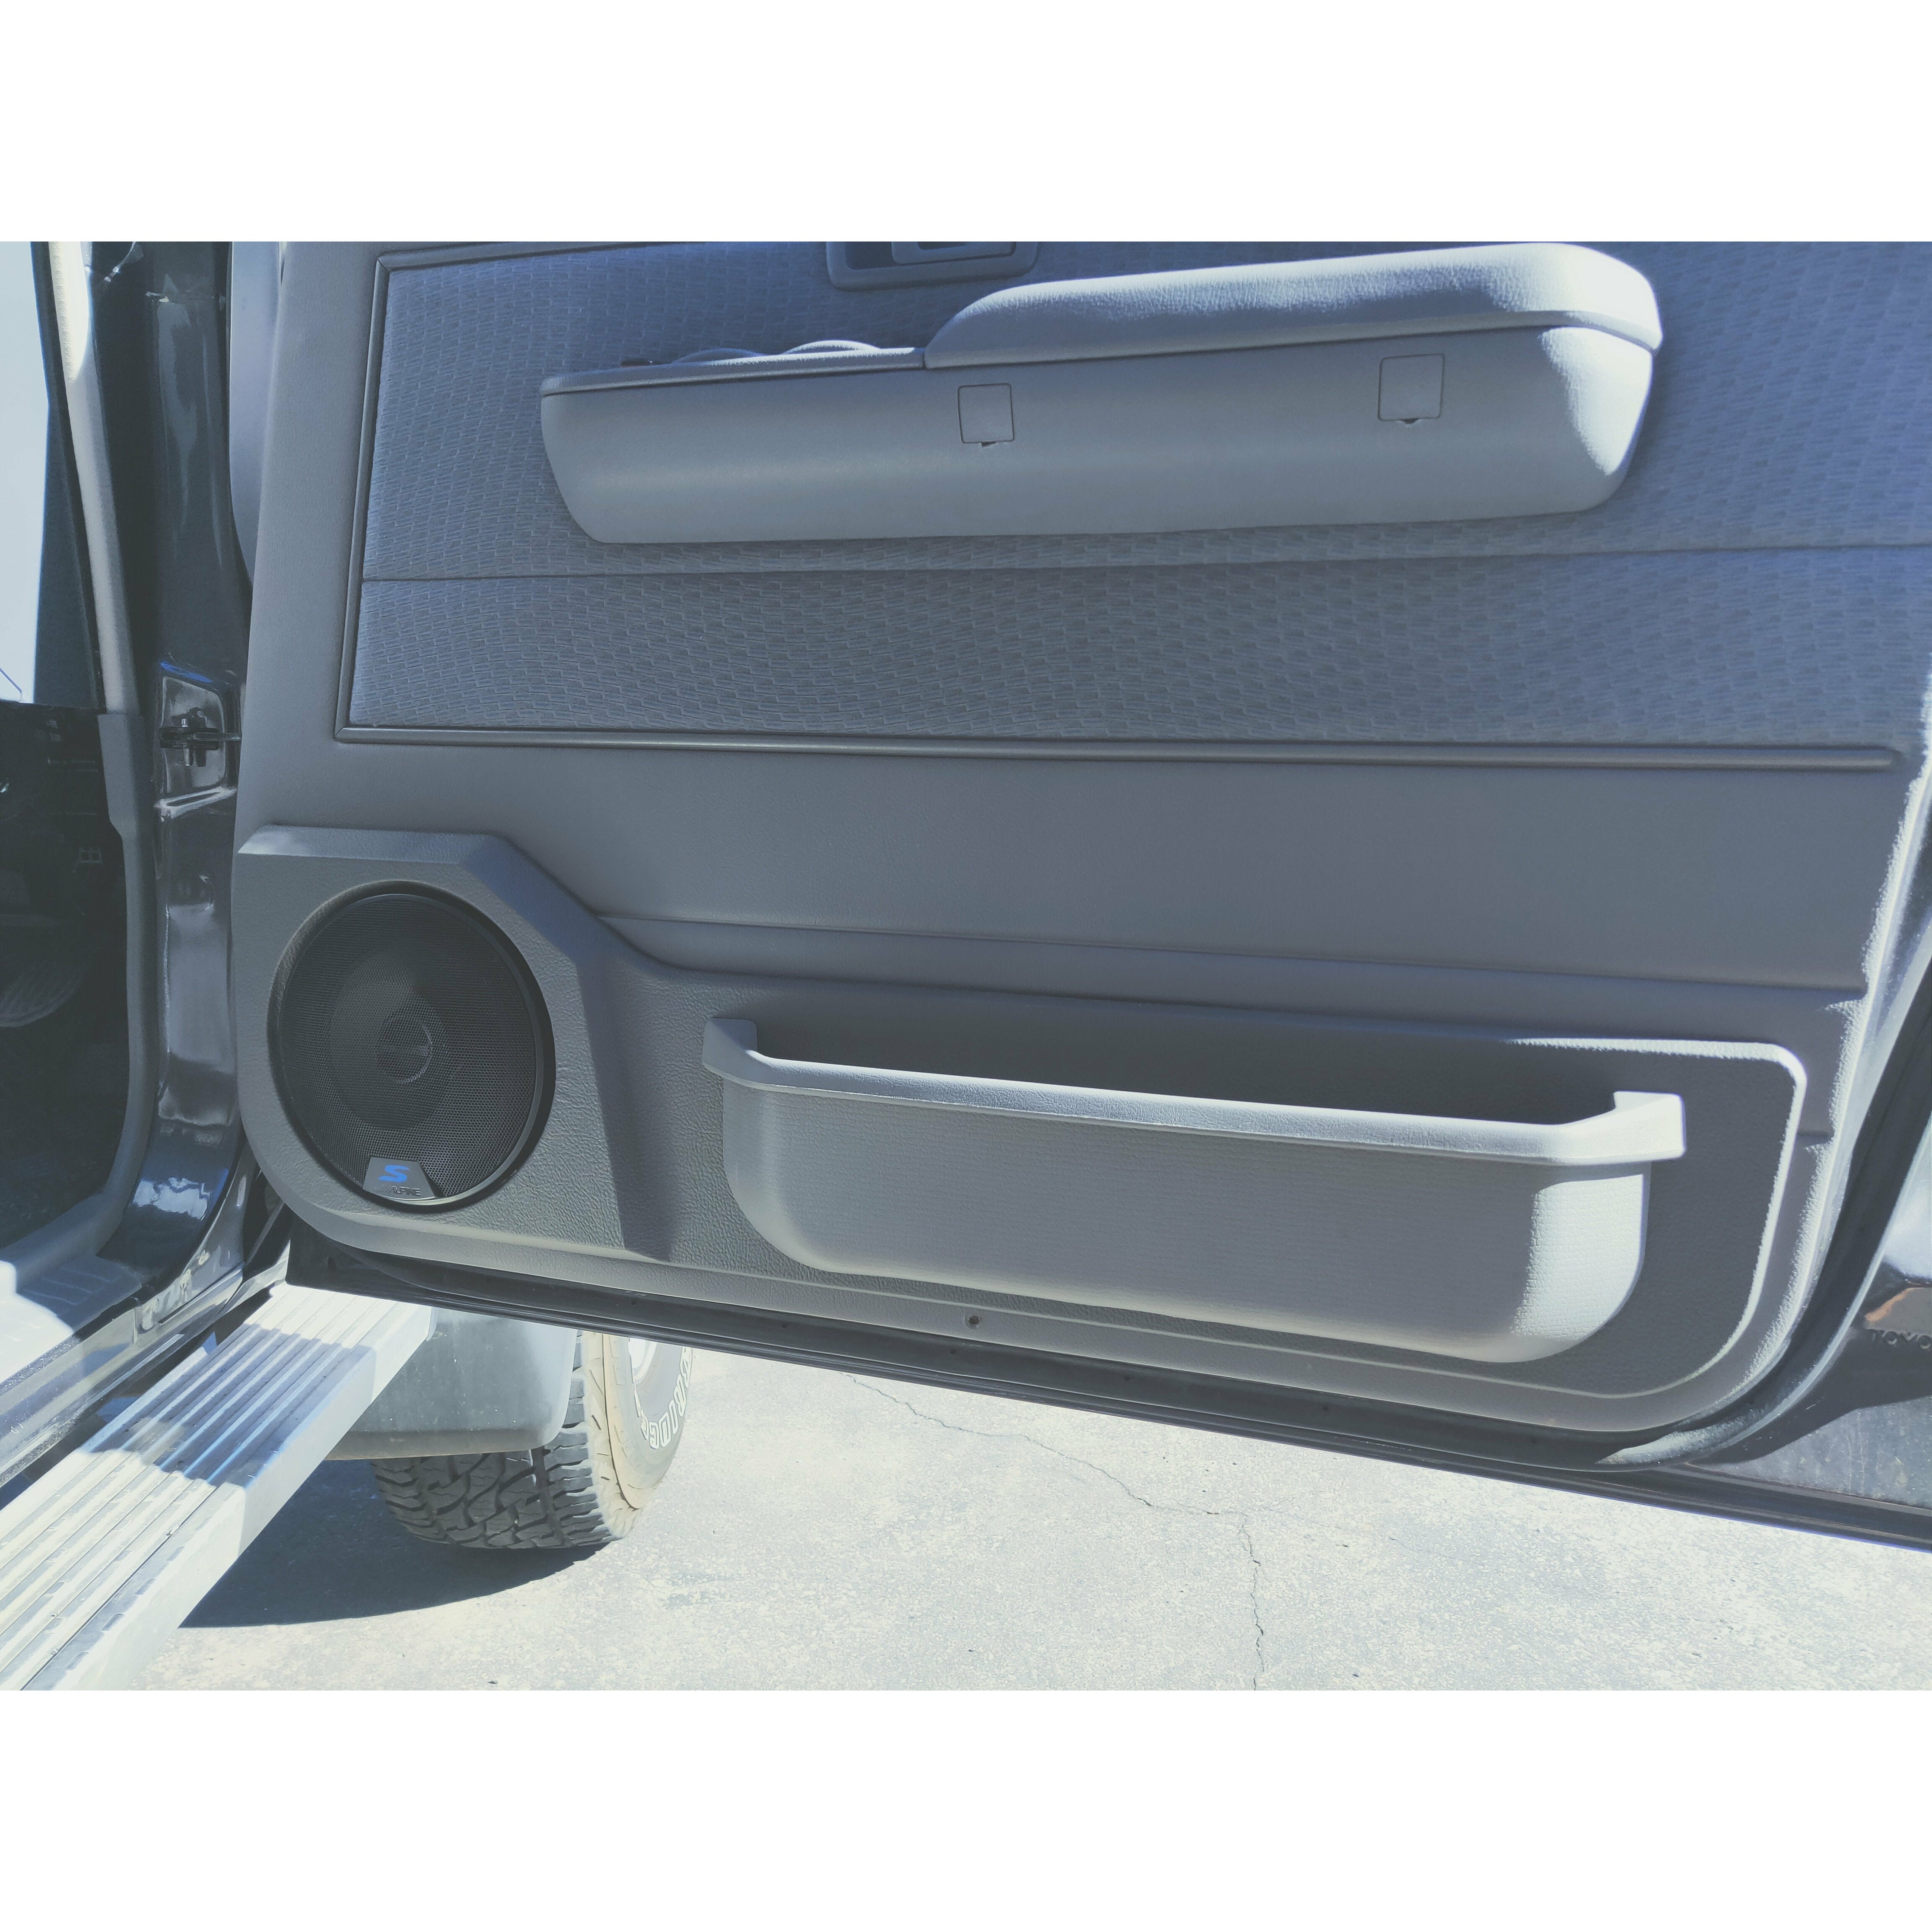 Alpine Speakers and 70 Series Landcruiser Pods Packages